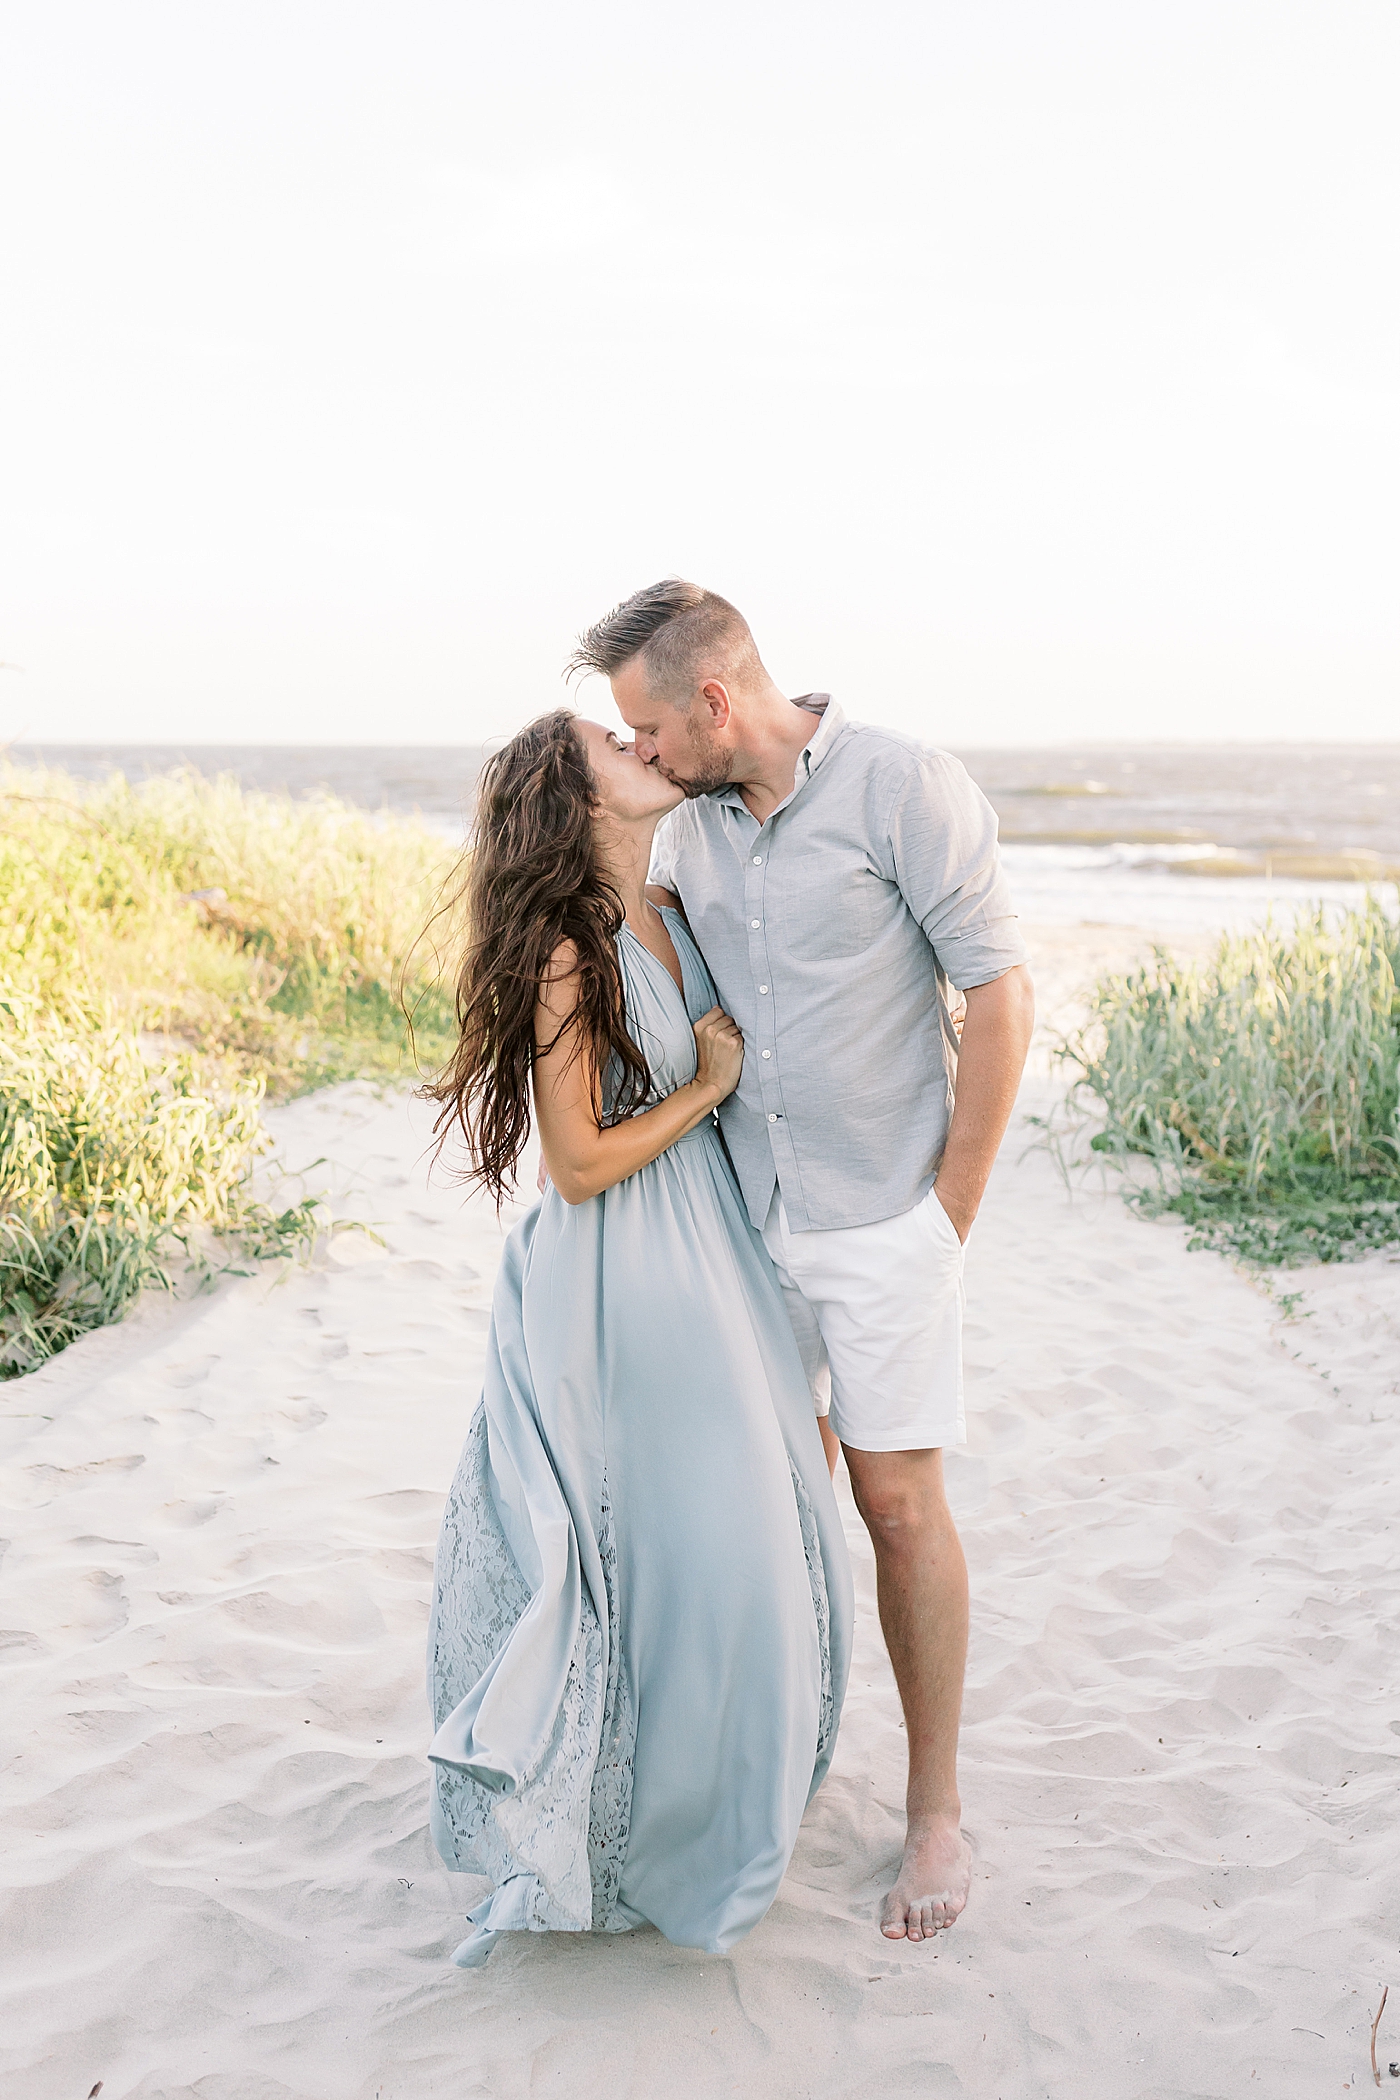 Mom and dad kiss during beach family photos in Charleston | Image by Caitlyn Motycka